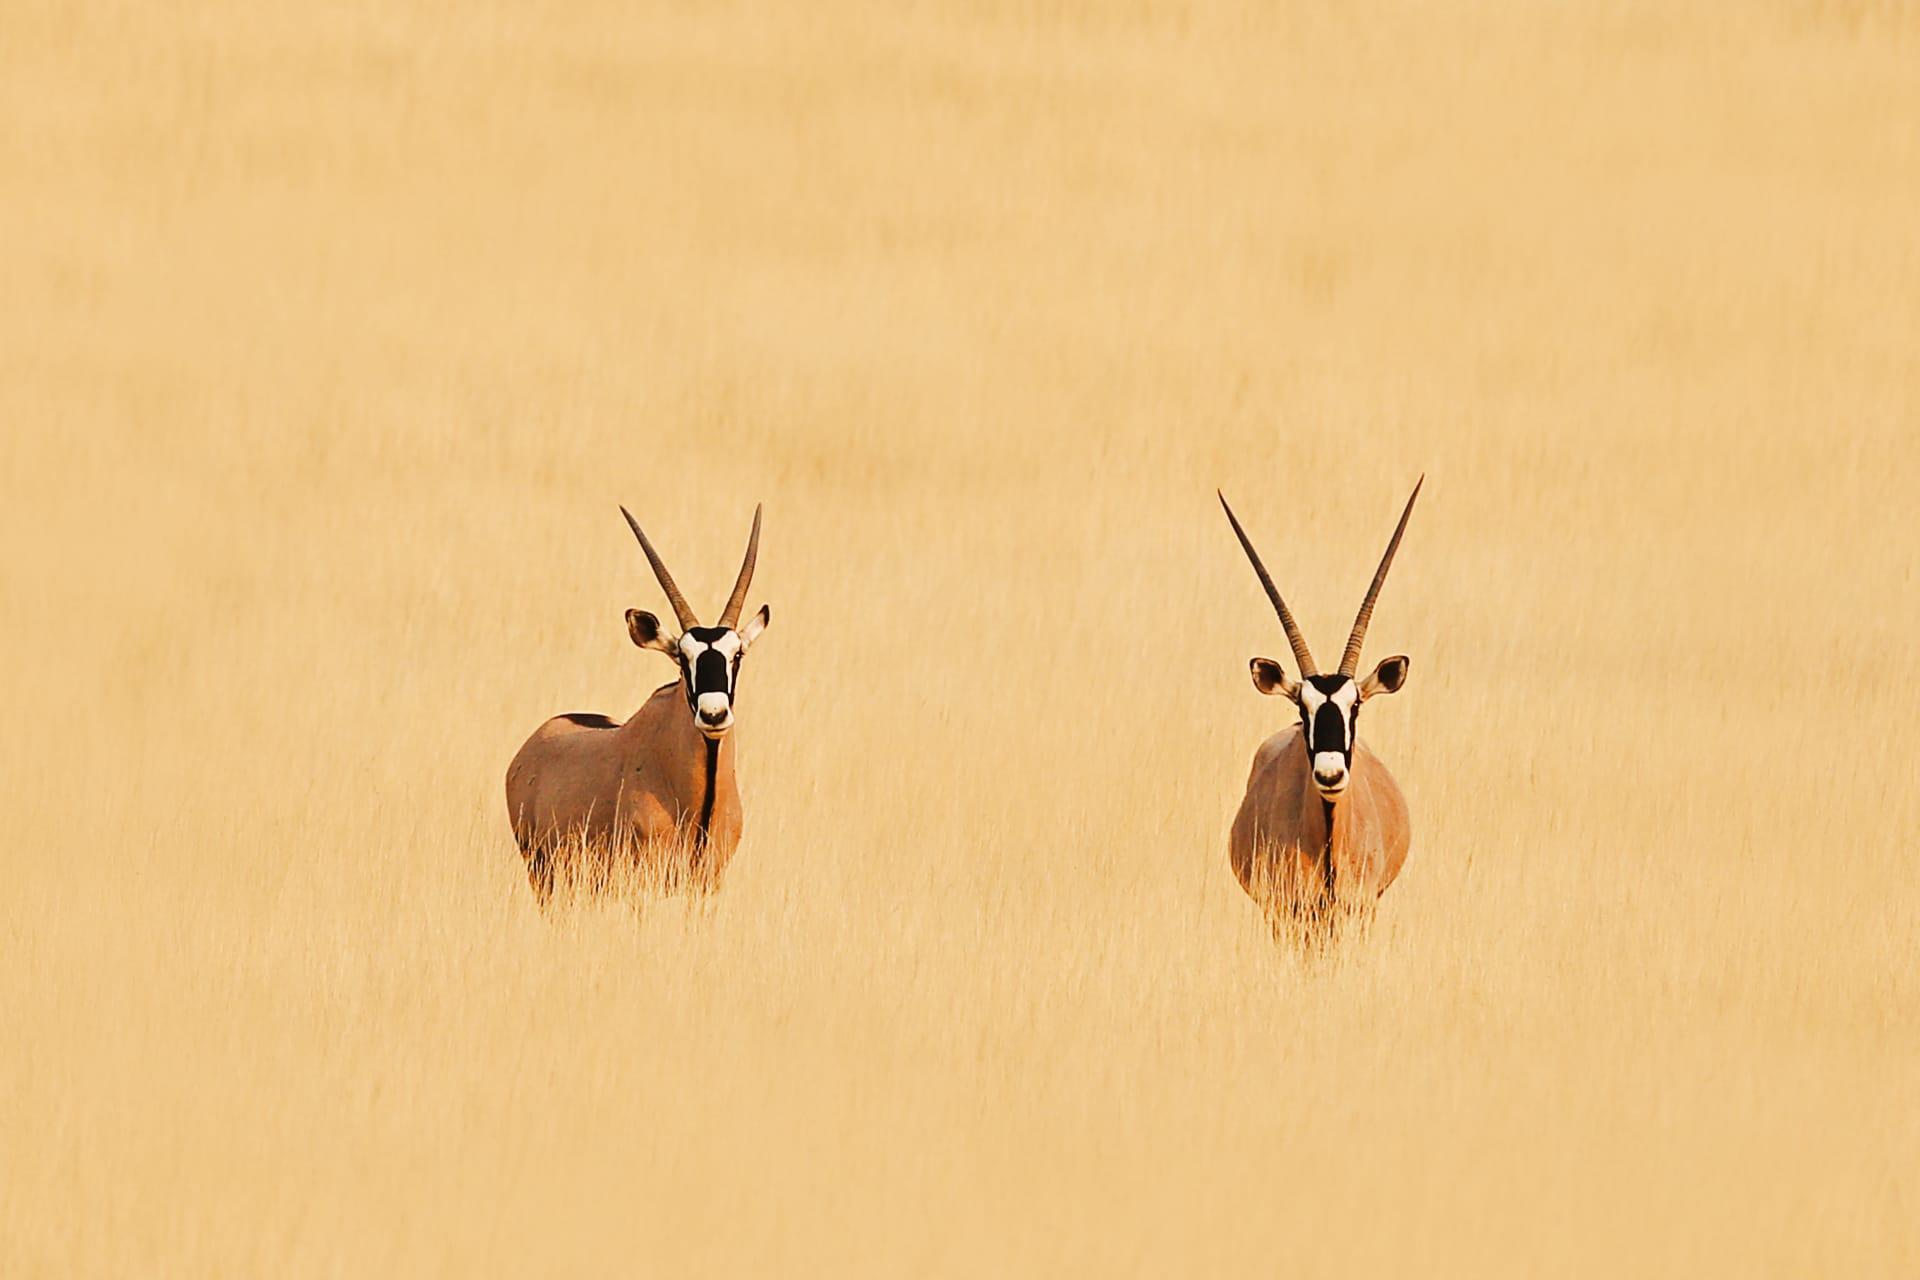 Antelope pictures